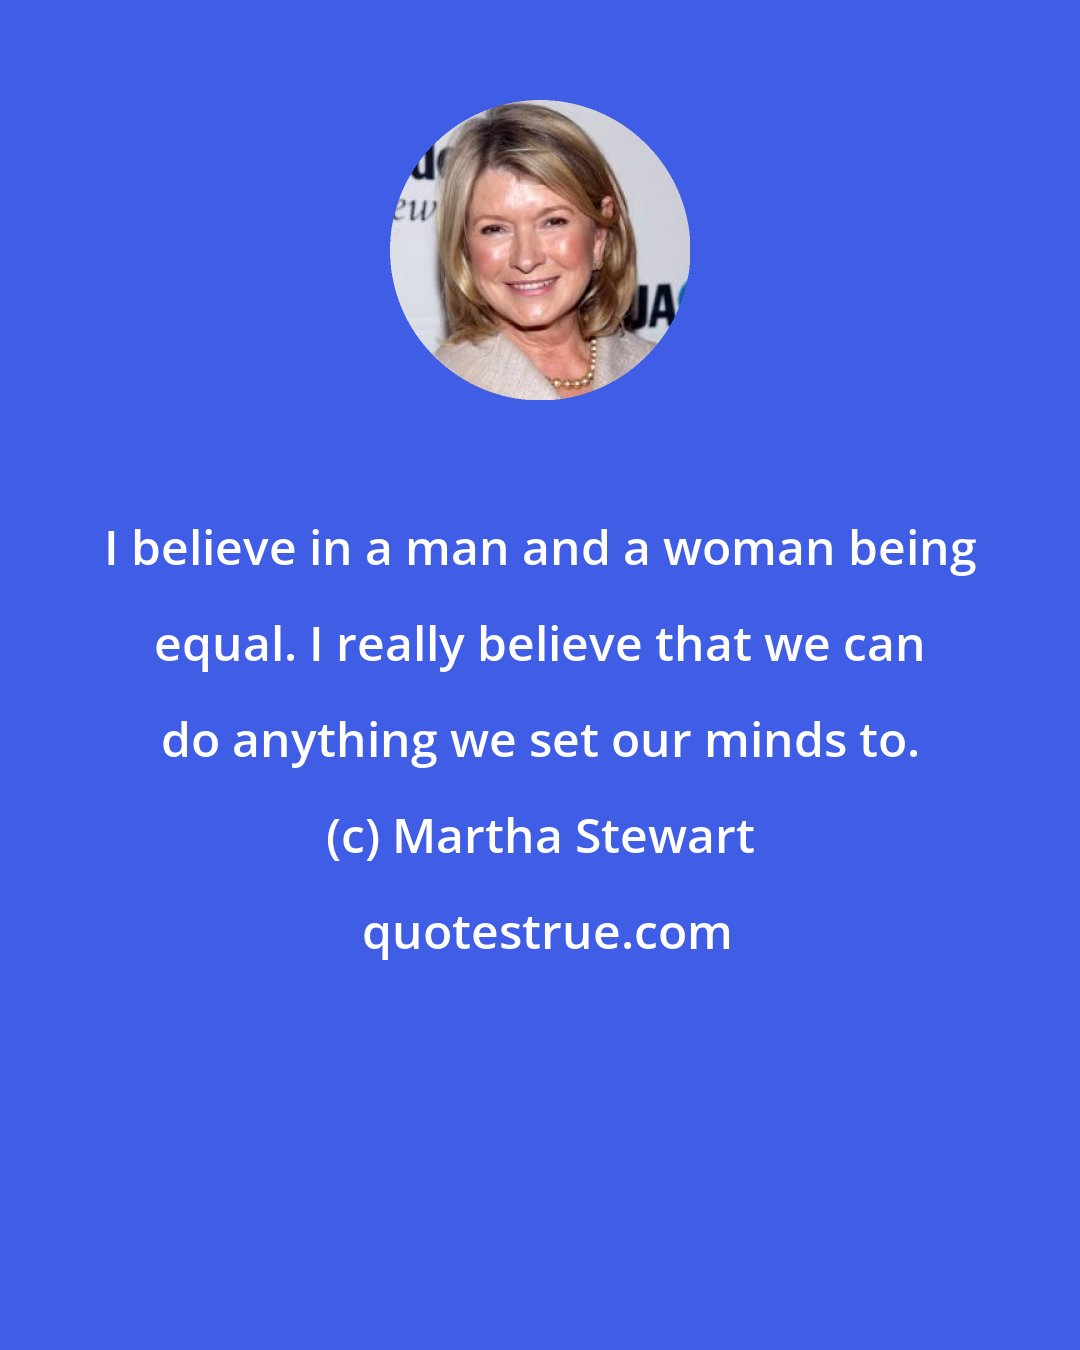 Martha Stewart: I believe in a man and a woman being equal. I really believe that we can do anything we set our minds to.